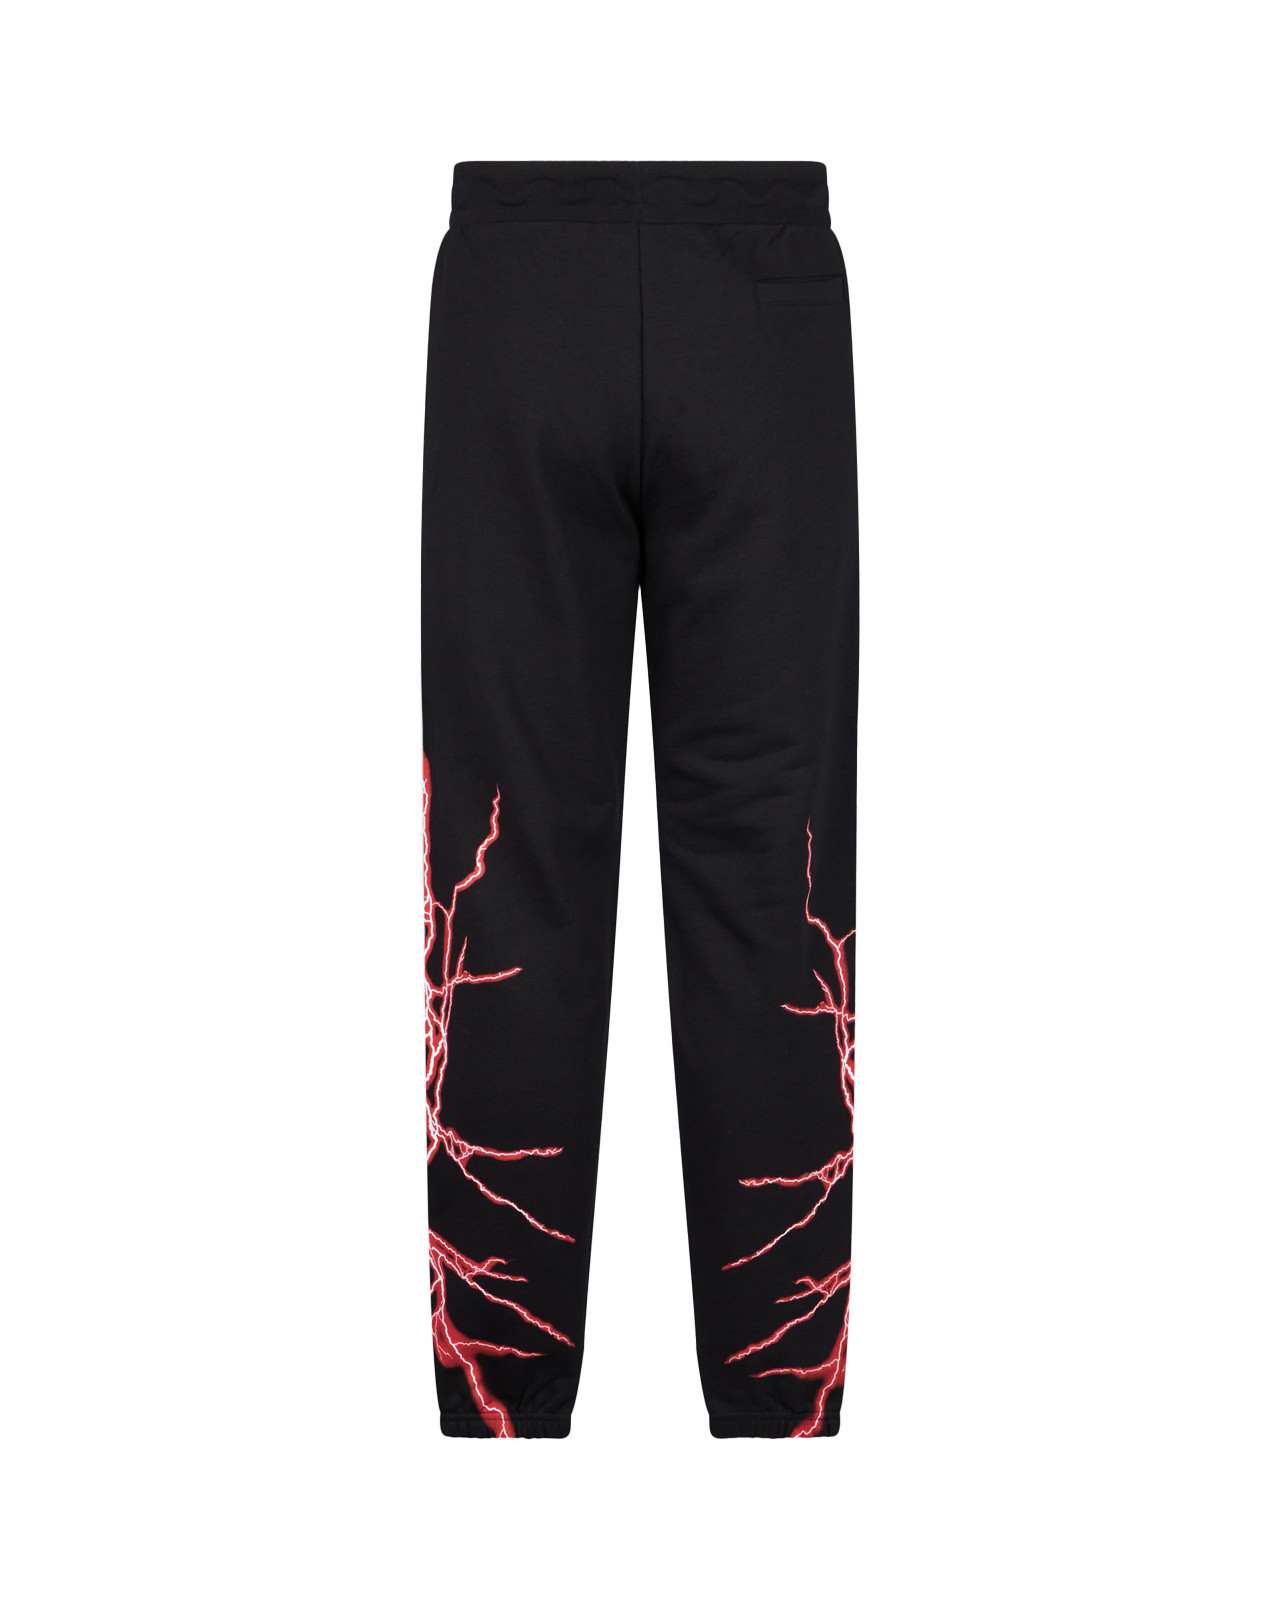 Phobia - Cotton trousers with lightning bolt print, Black, large image number 3